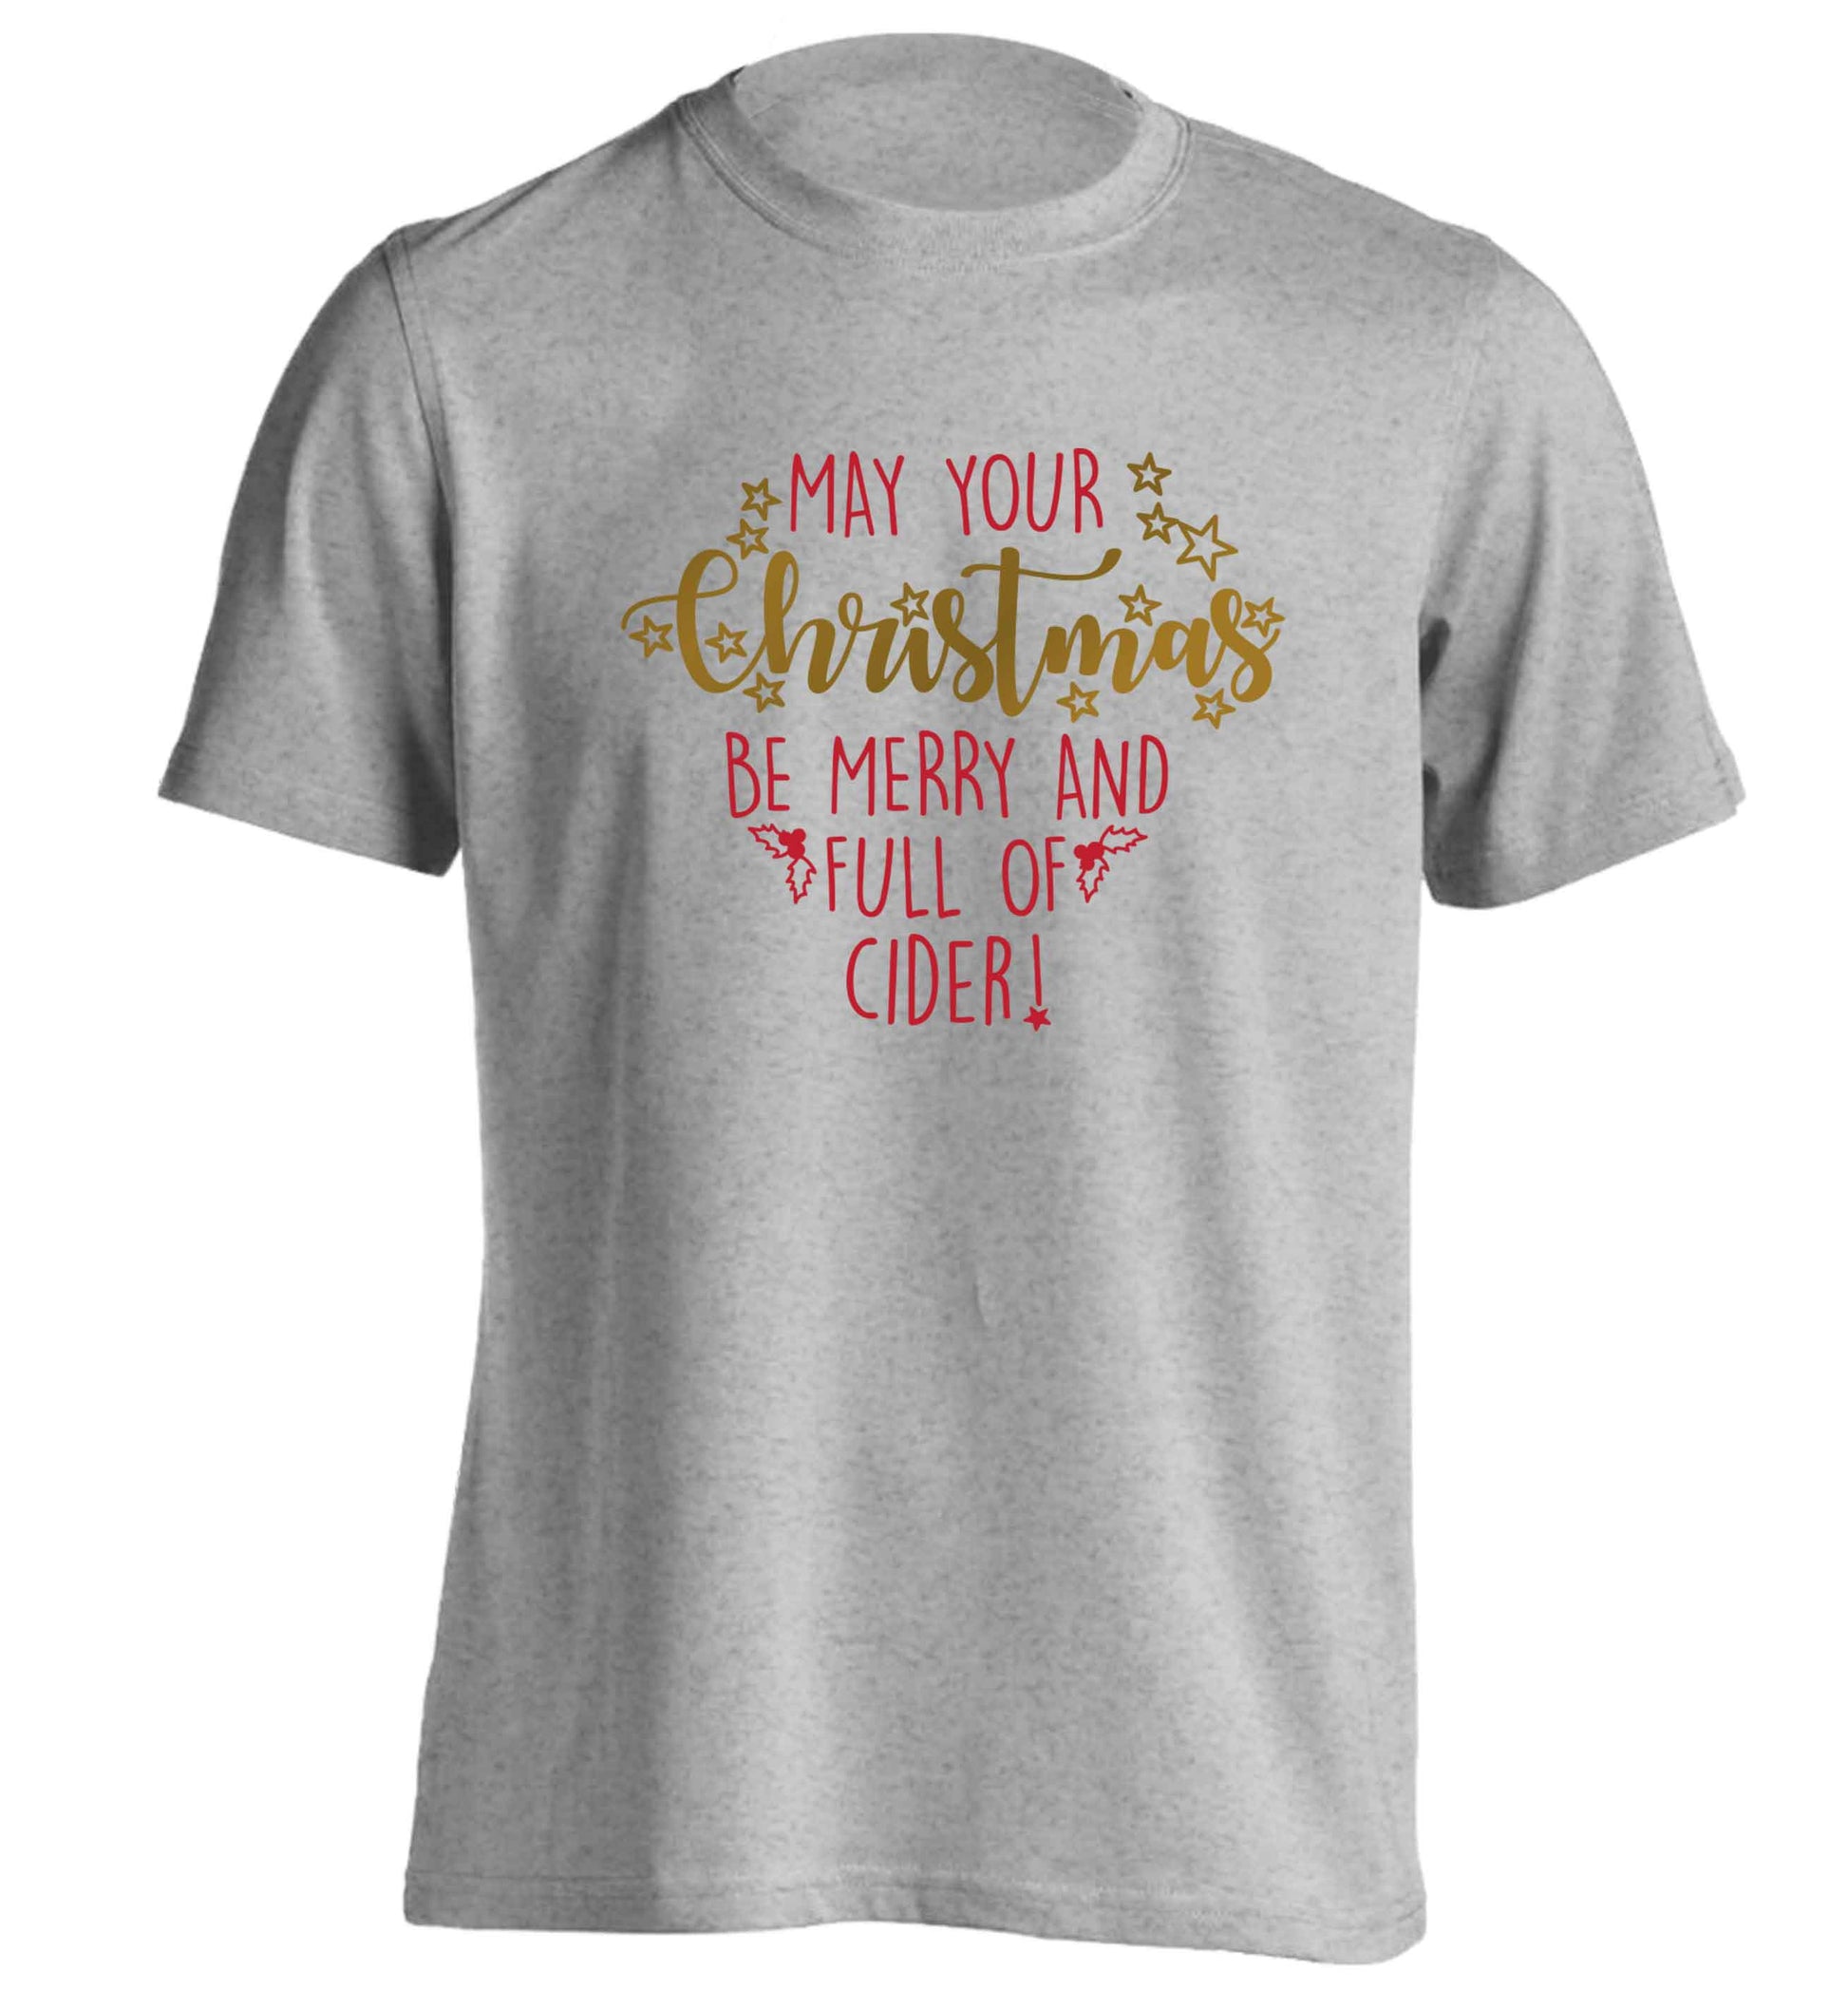 May your Christmas be merry and full of cider adults unisex grey Tshirt 2XL